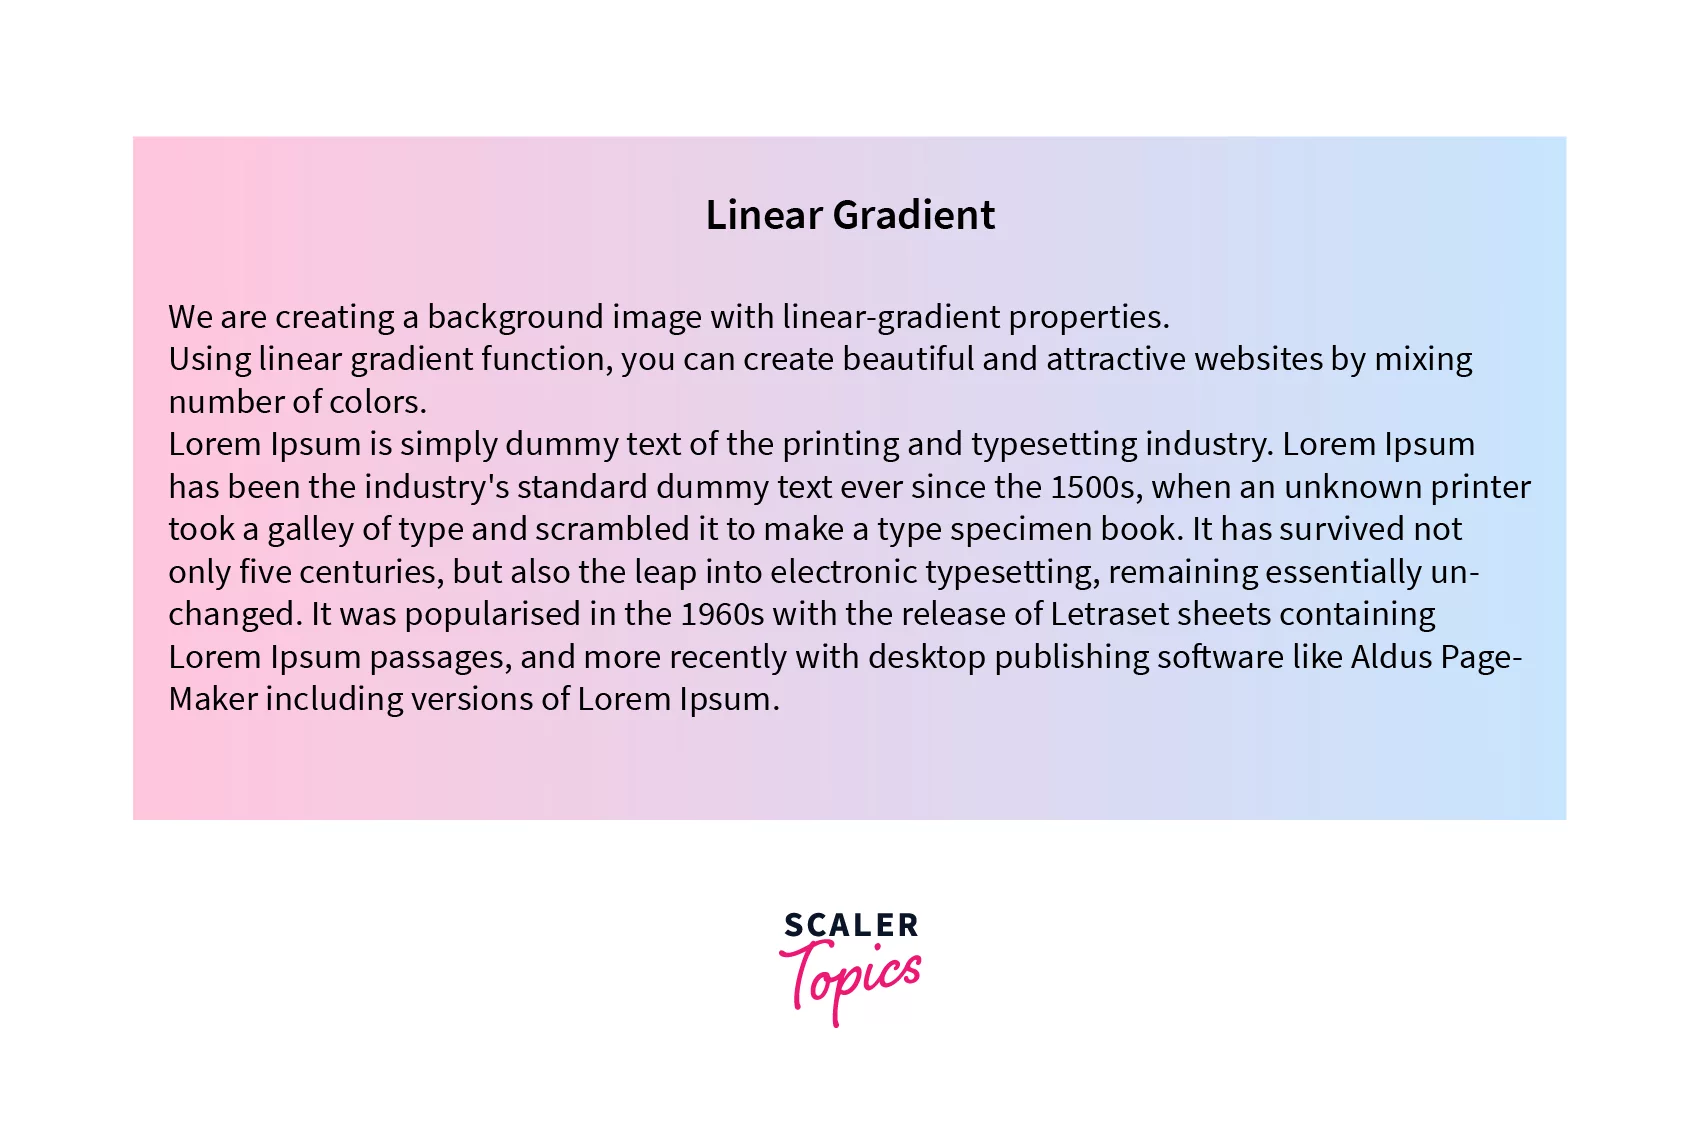 creating a linear gradient background using CSS